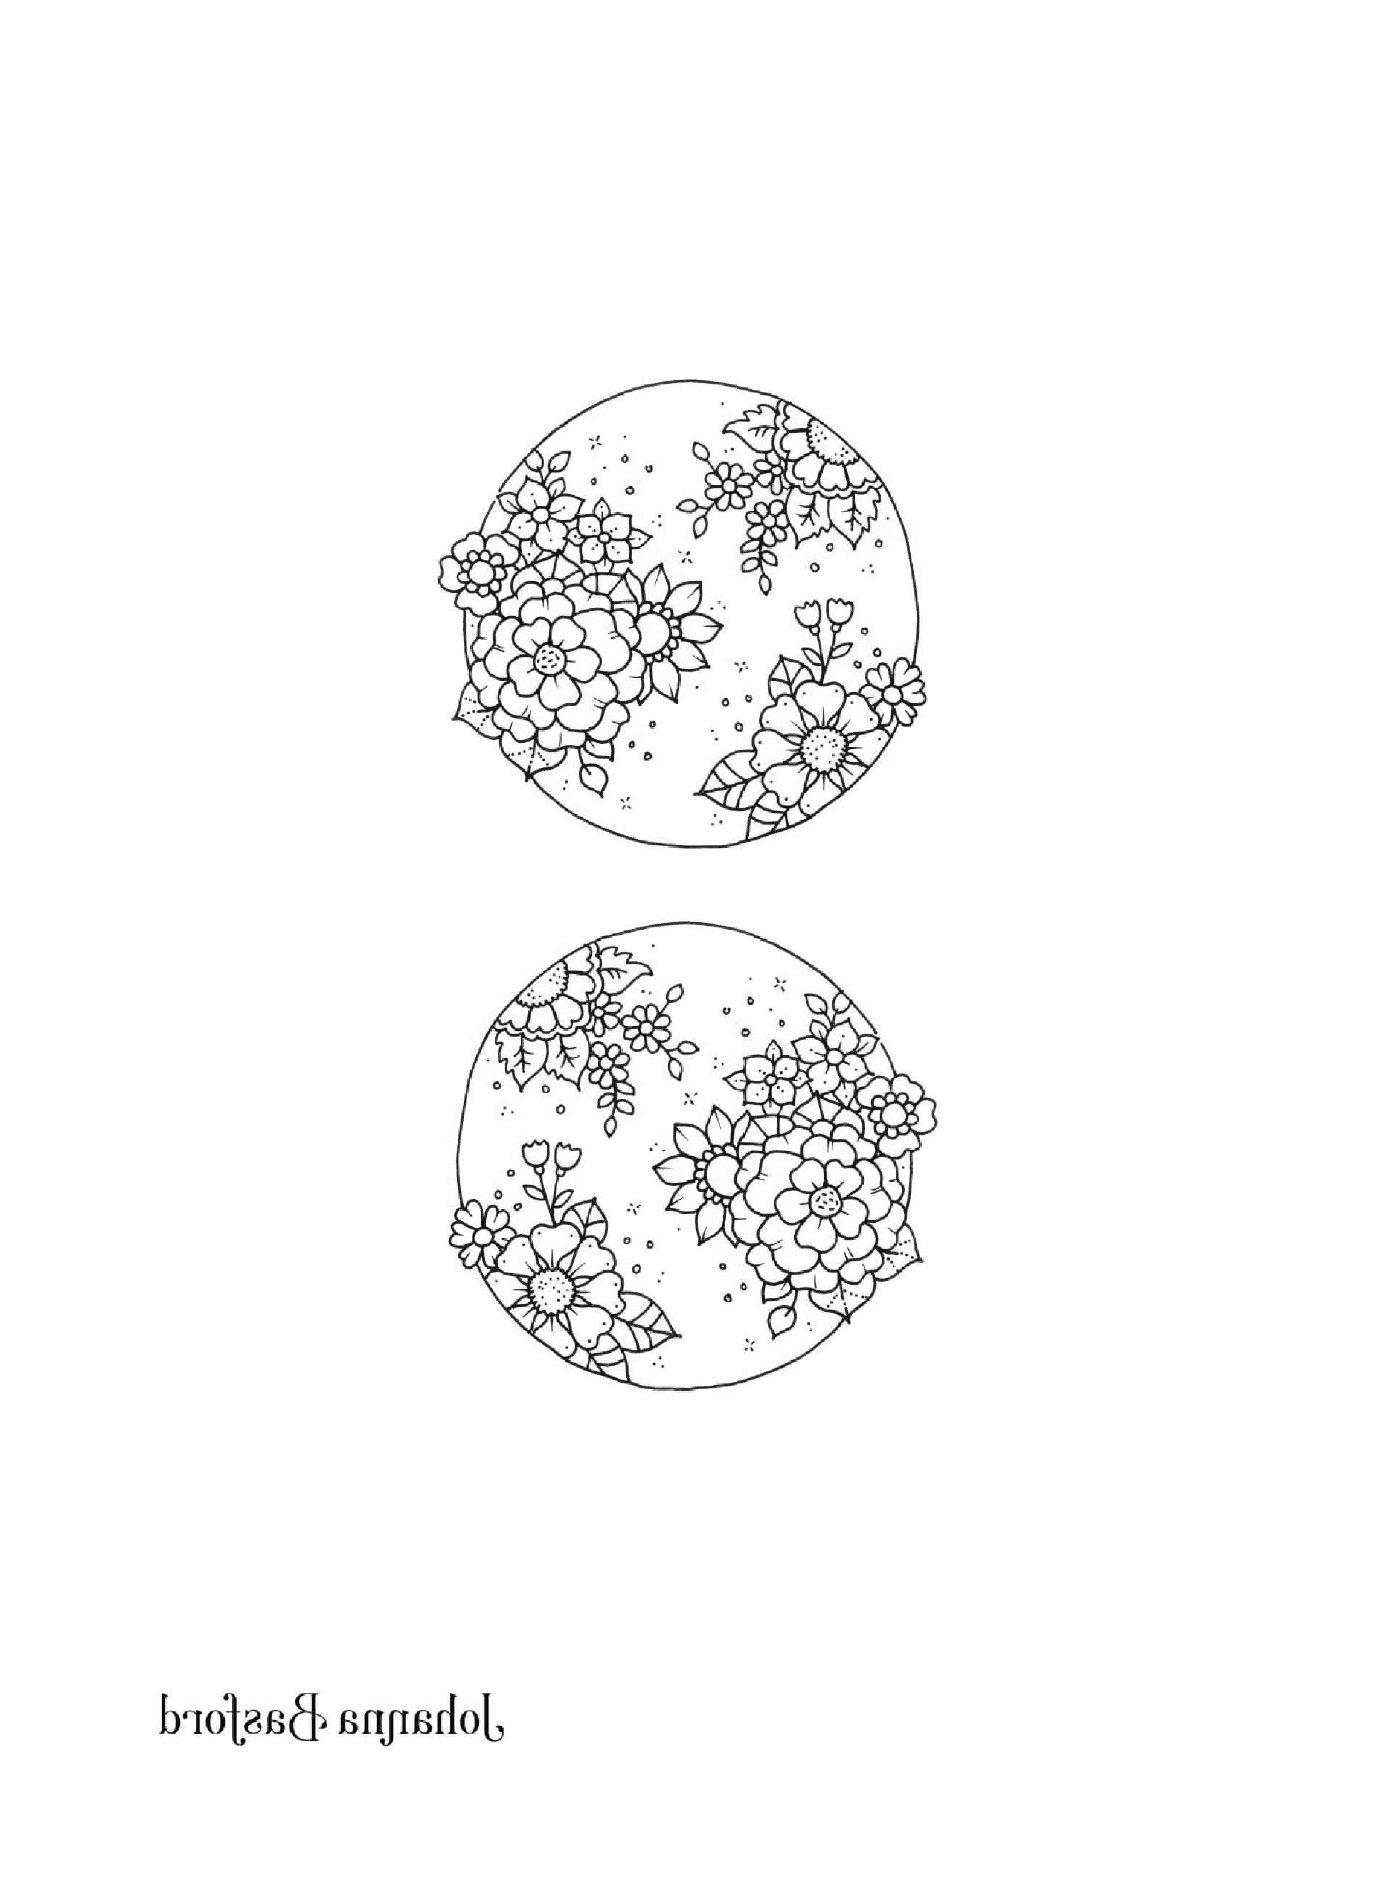  Two black and white drawings of a globe 